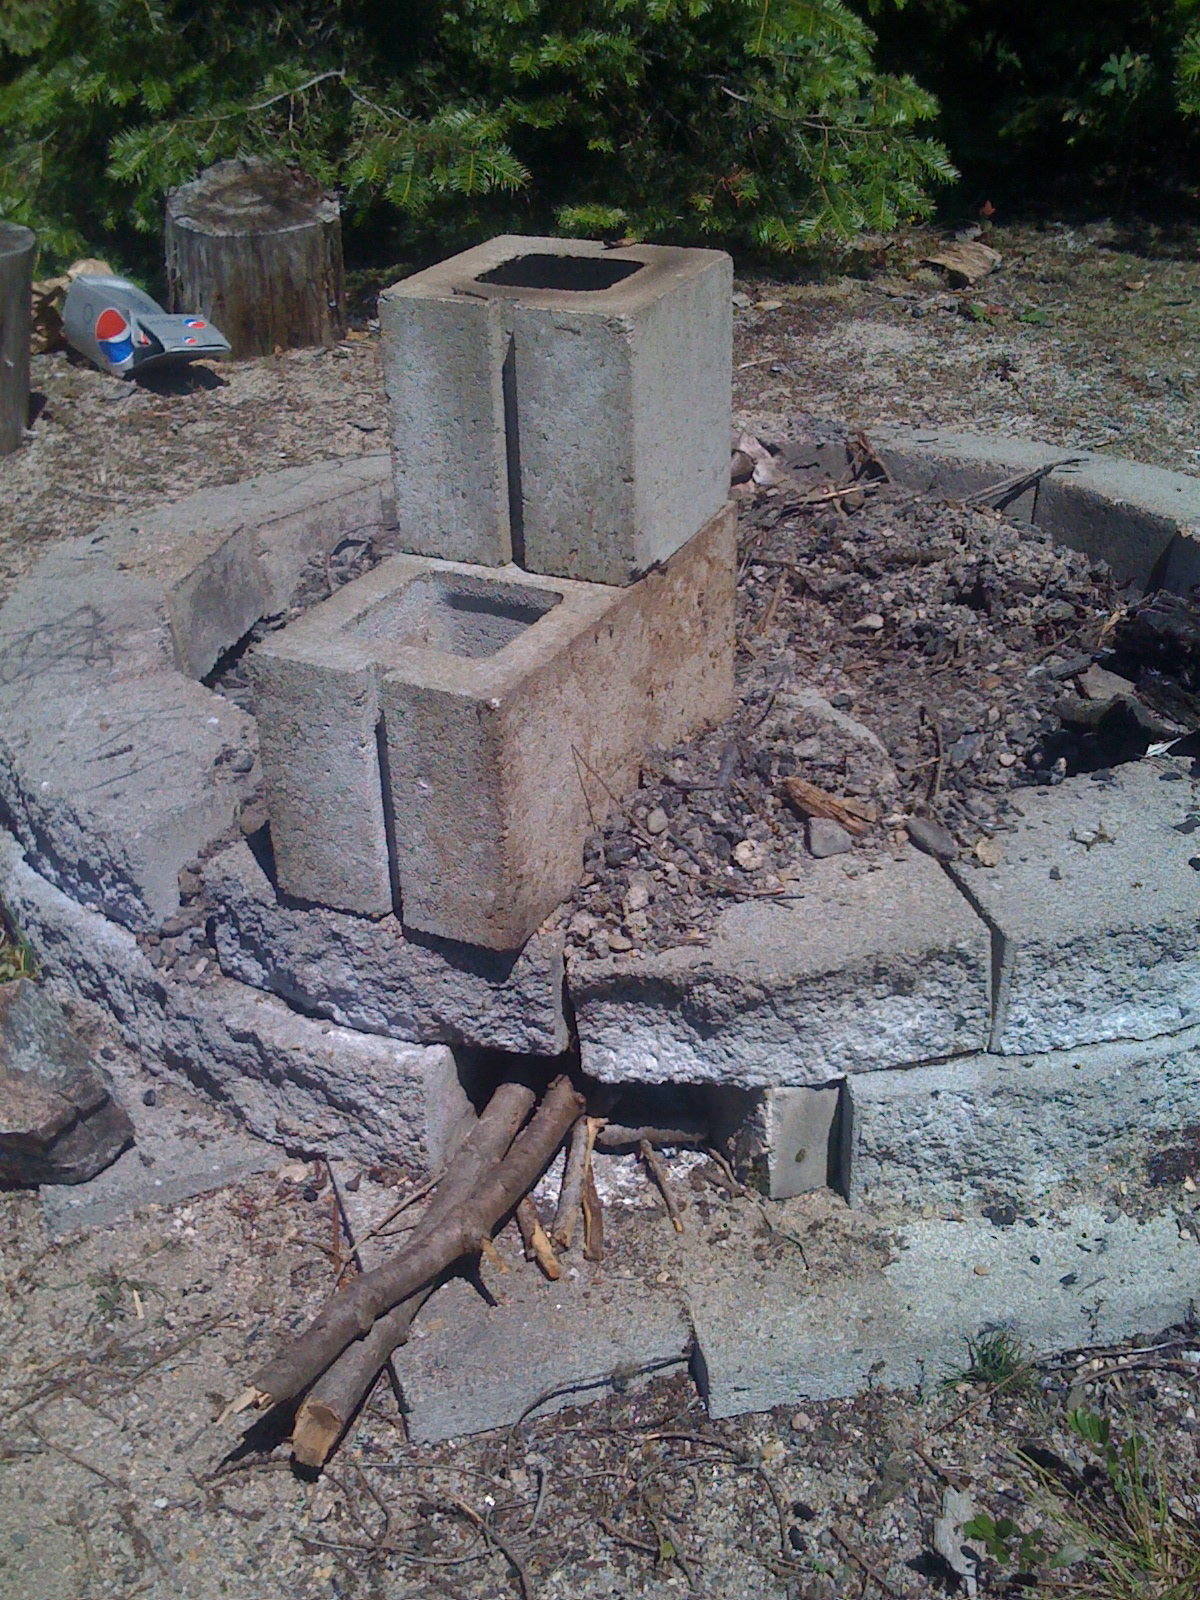 Building a simple rocket stove | One small step for man